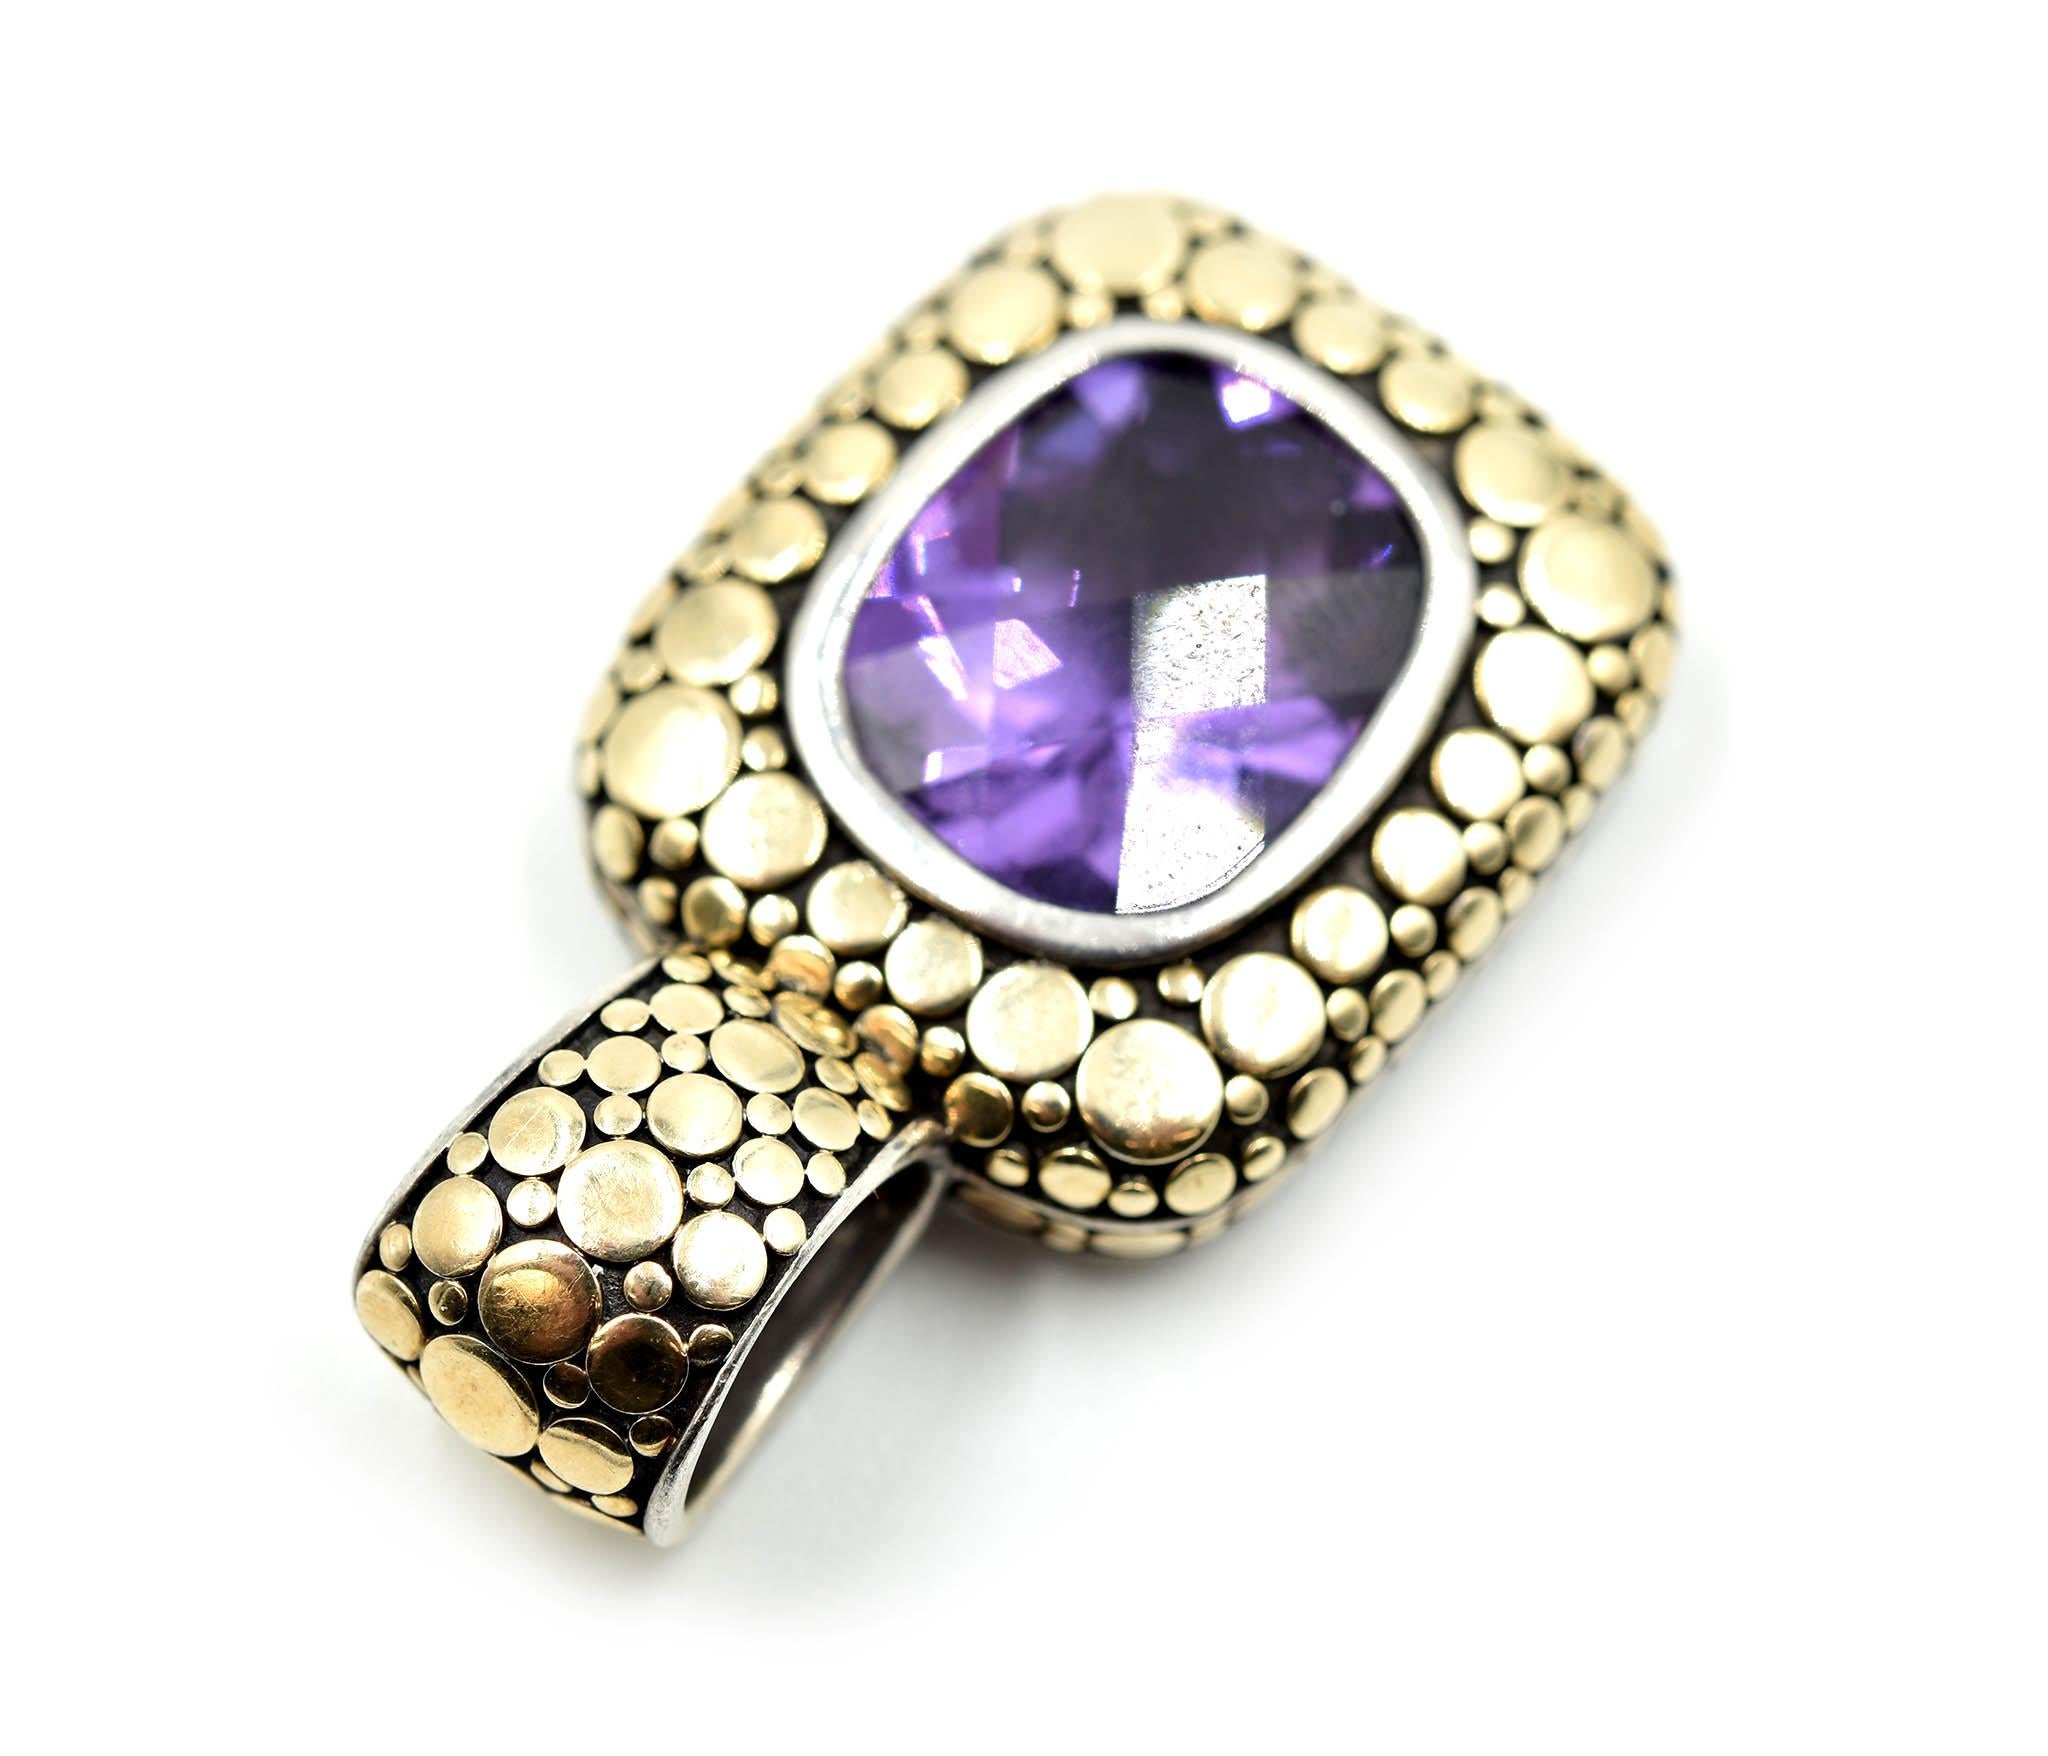 This style by John Hardy is timeless! The pendant is designed in 18k yellow gold and sterling silver. The center of the pendant is set with a checkerboard cushion cut amethyst gemstone. The dazzling gemstone measures 13.13mm in length and 11.23mm in